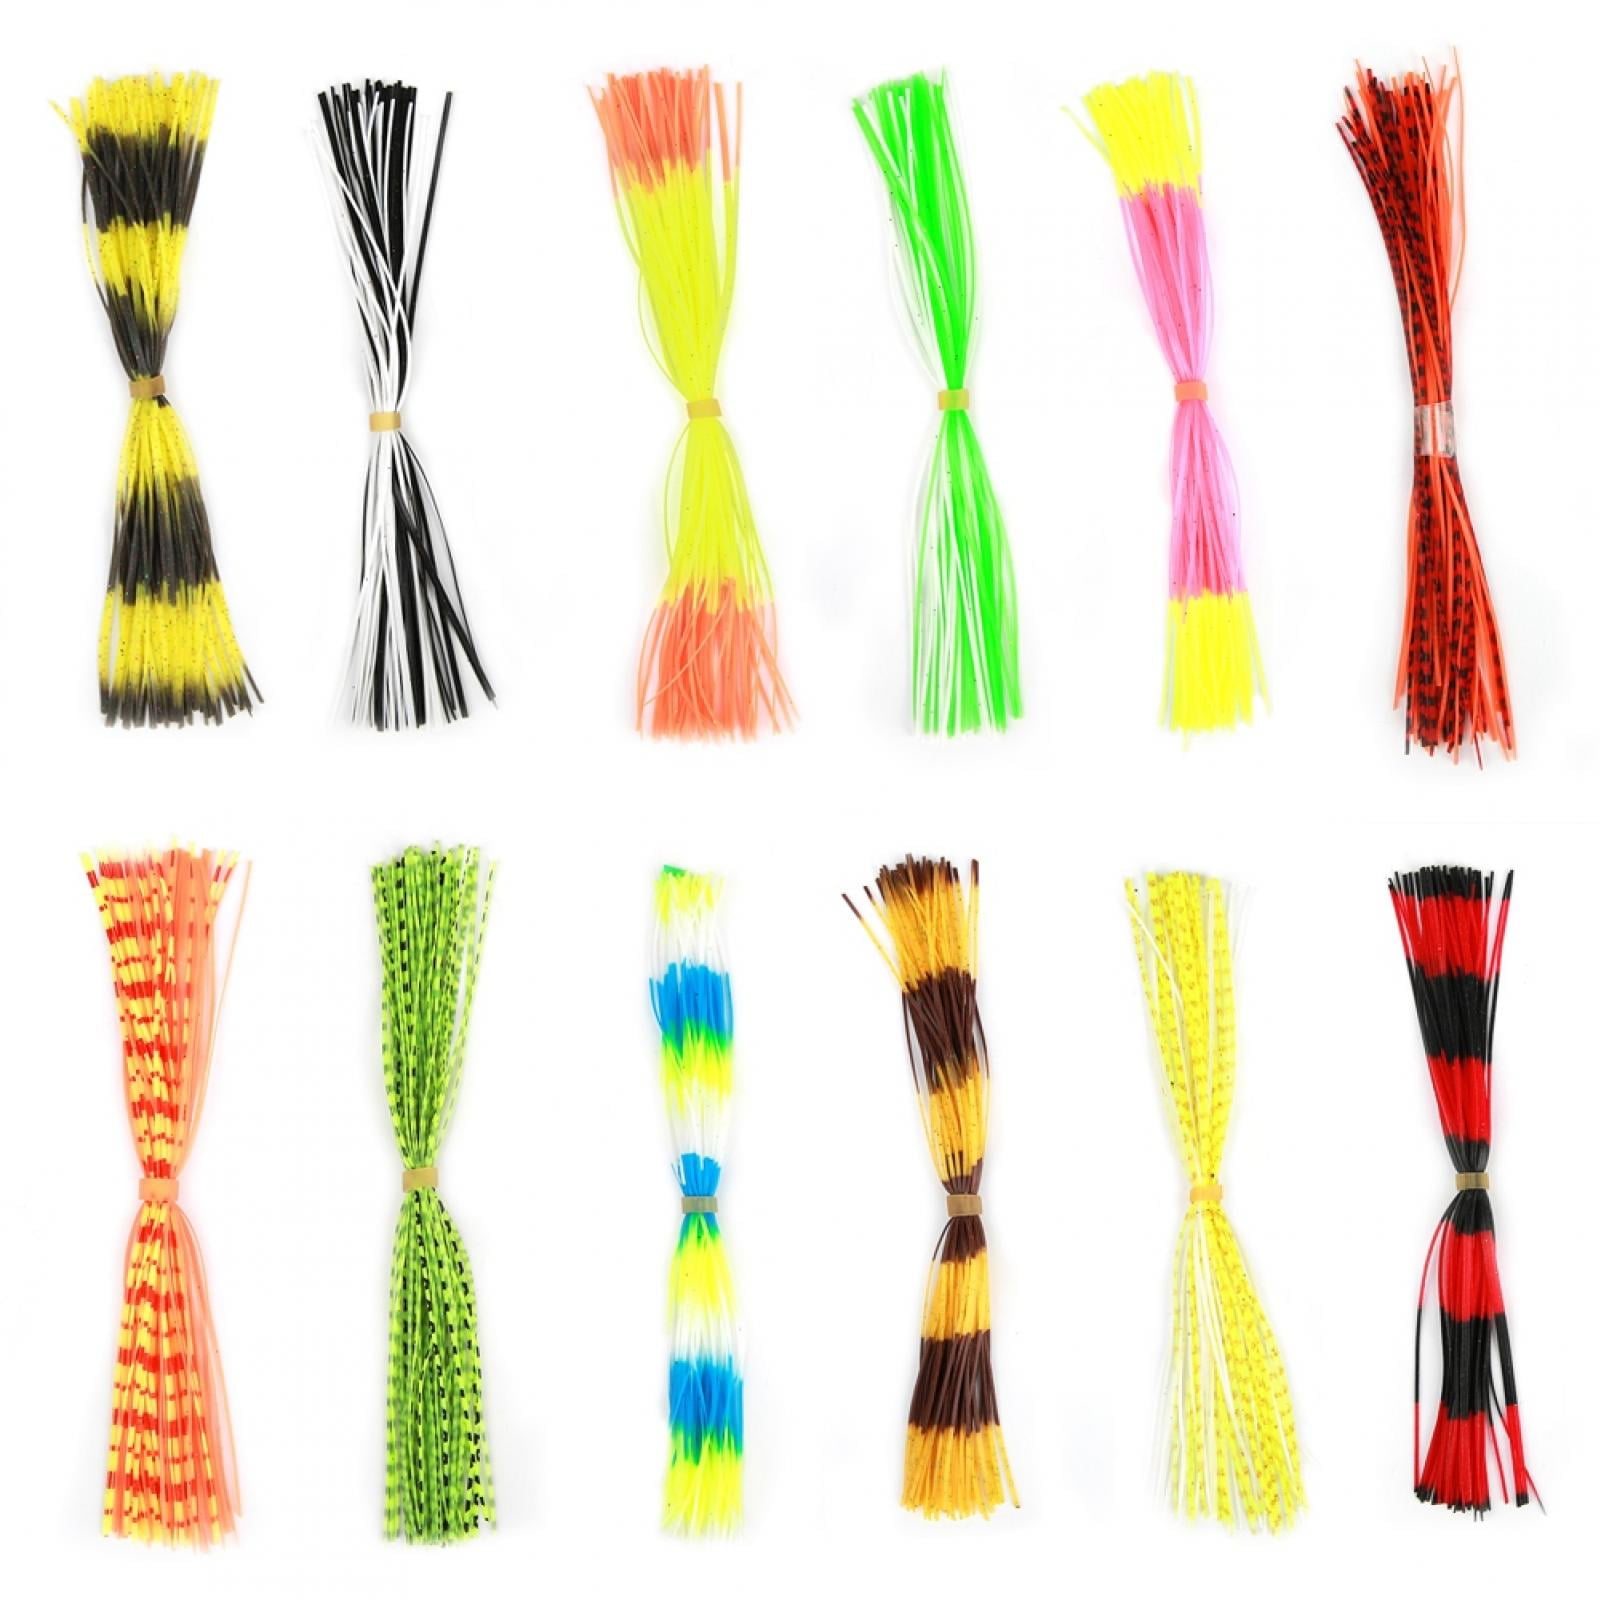 8 Bundles 50 Strands Silicone Skirts Jigs Replacement Skirts DIY Fly Tying Fishing Lure Accessories Buzzbaits Spinnerbaits Color All Yellow